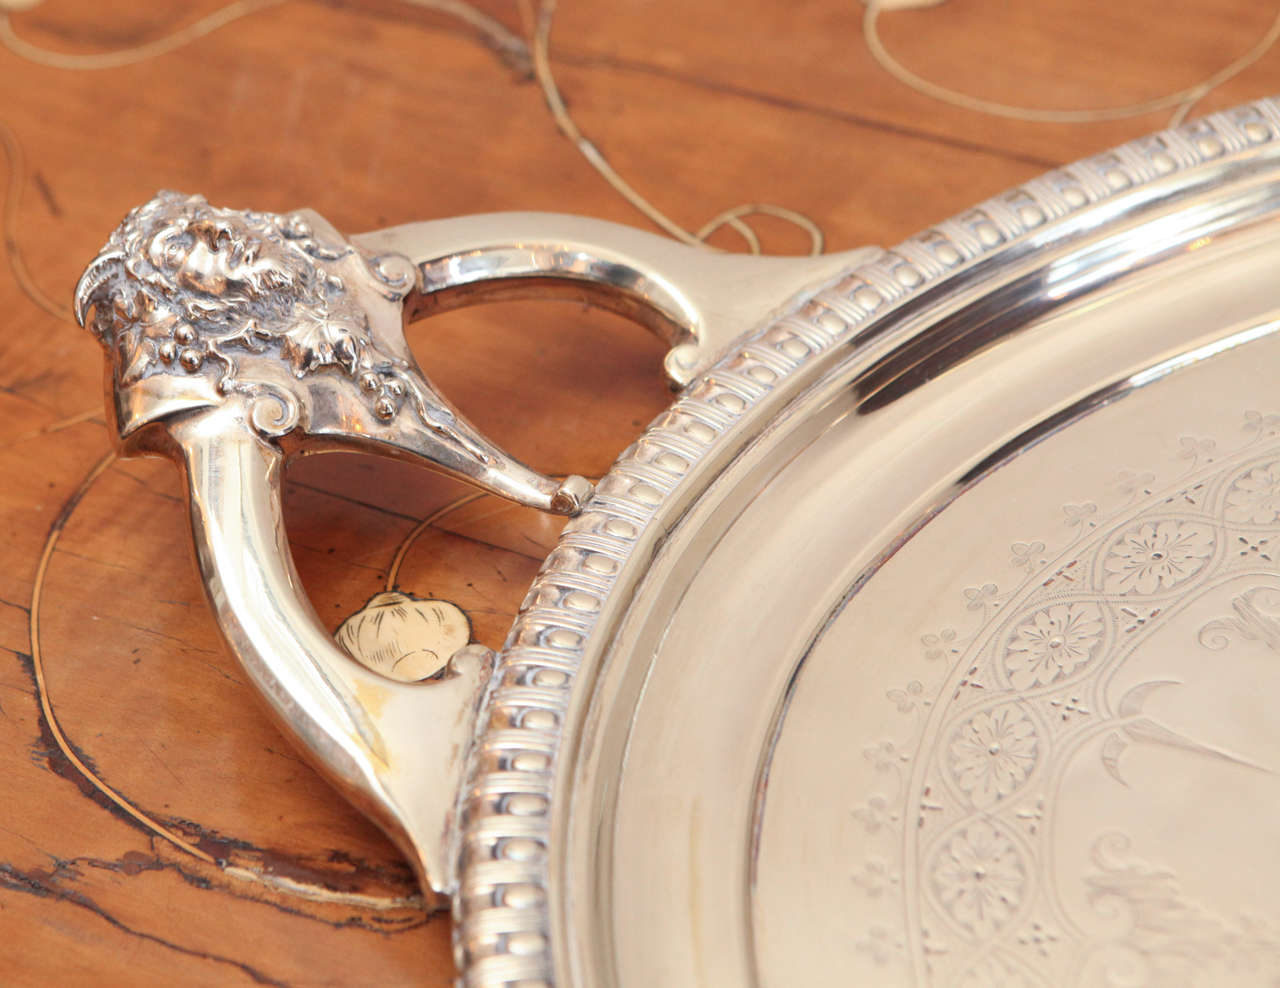 Engraved Italian Silver Tray In Excellent Condition For Sale In Newport Beach, CA